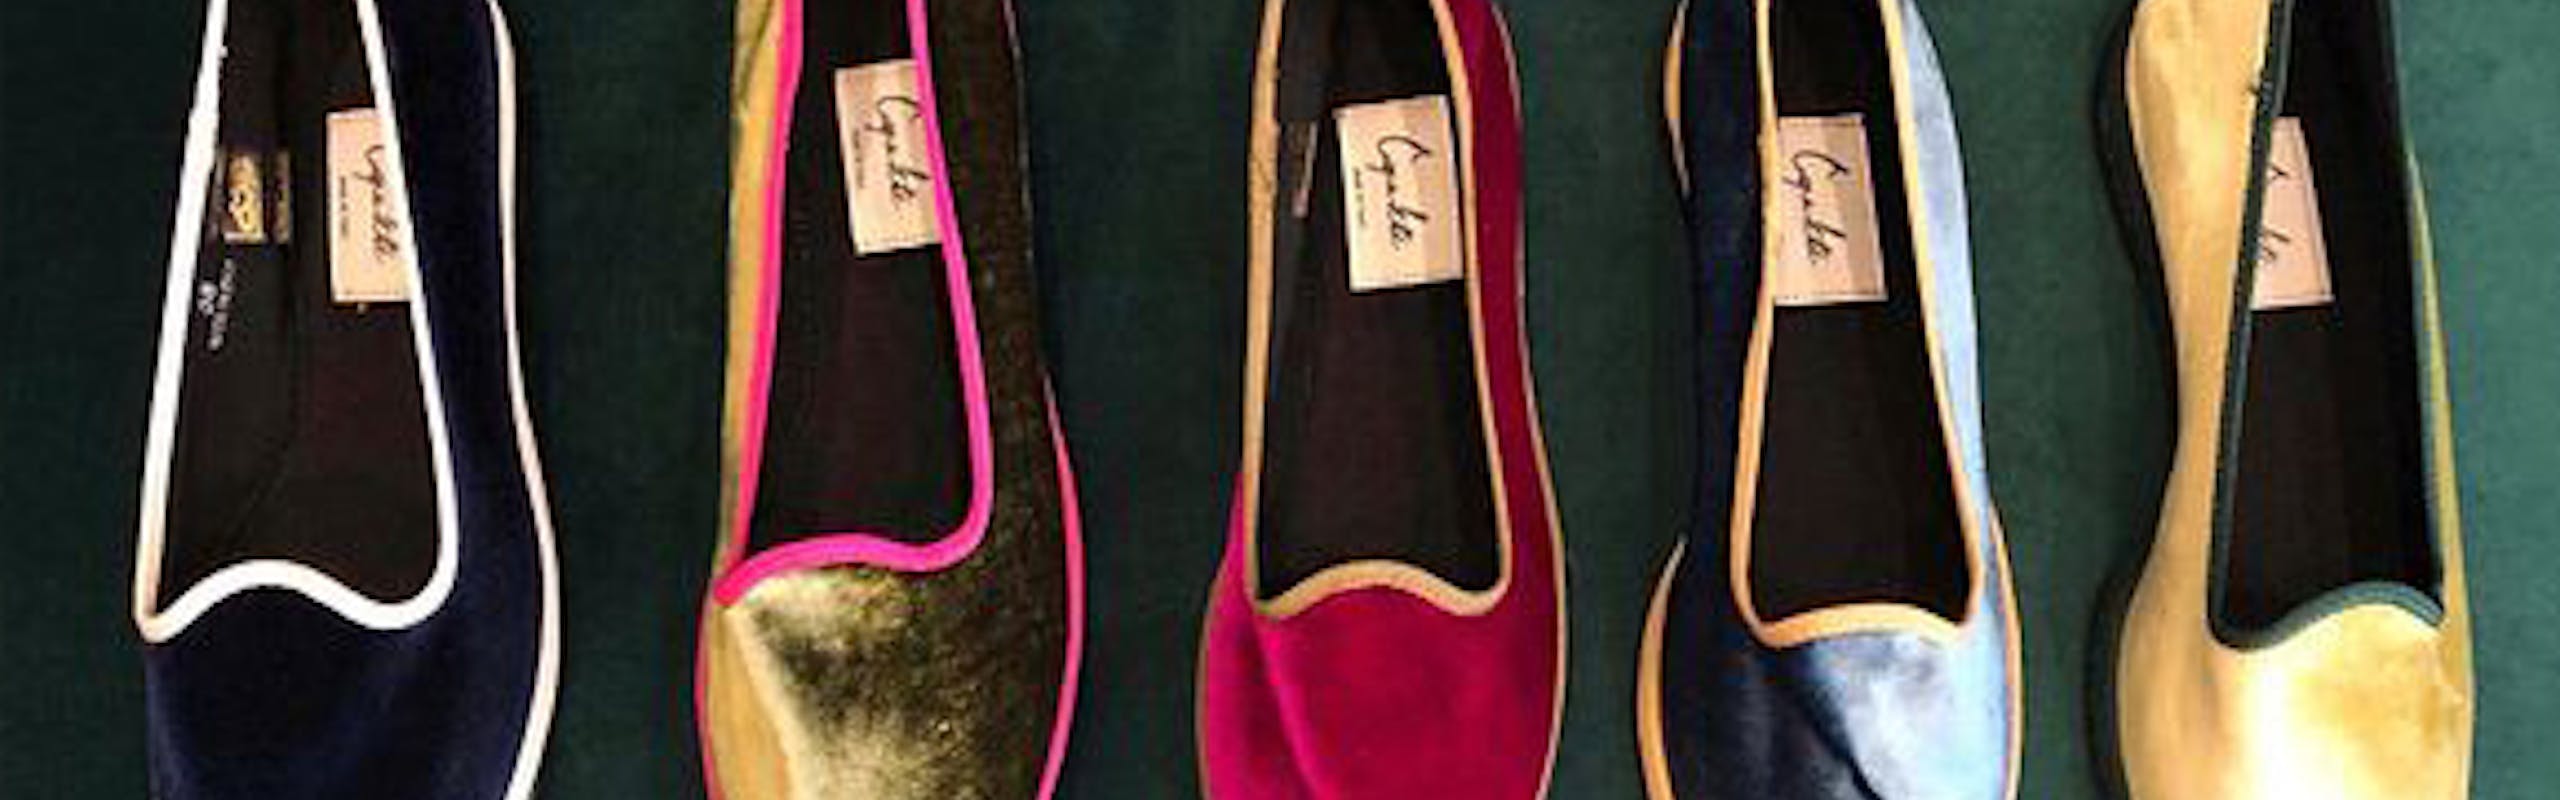 Five pairs of flat shoes are lined up side by side on a green velvet sofa. In order from left to the right the shoe colors are: black and white, gold and pink, red and pink, blue and orange, gold and green. 